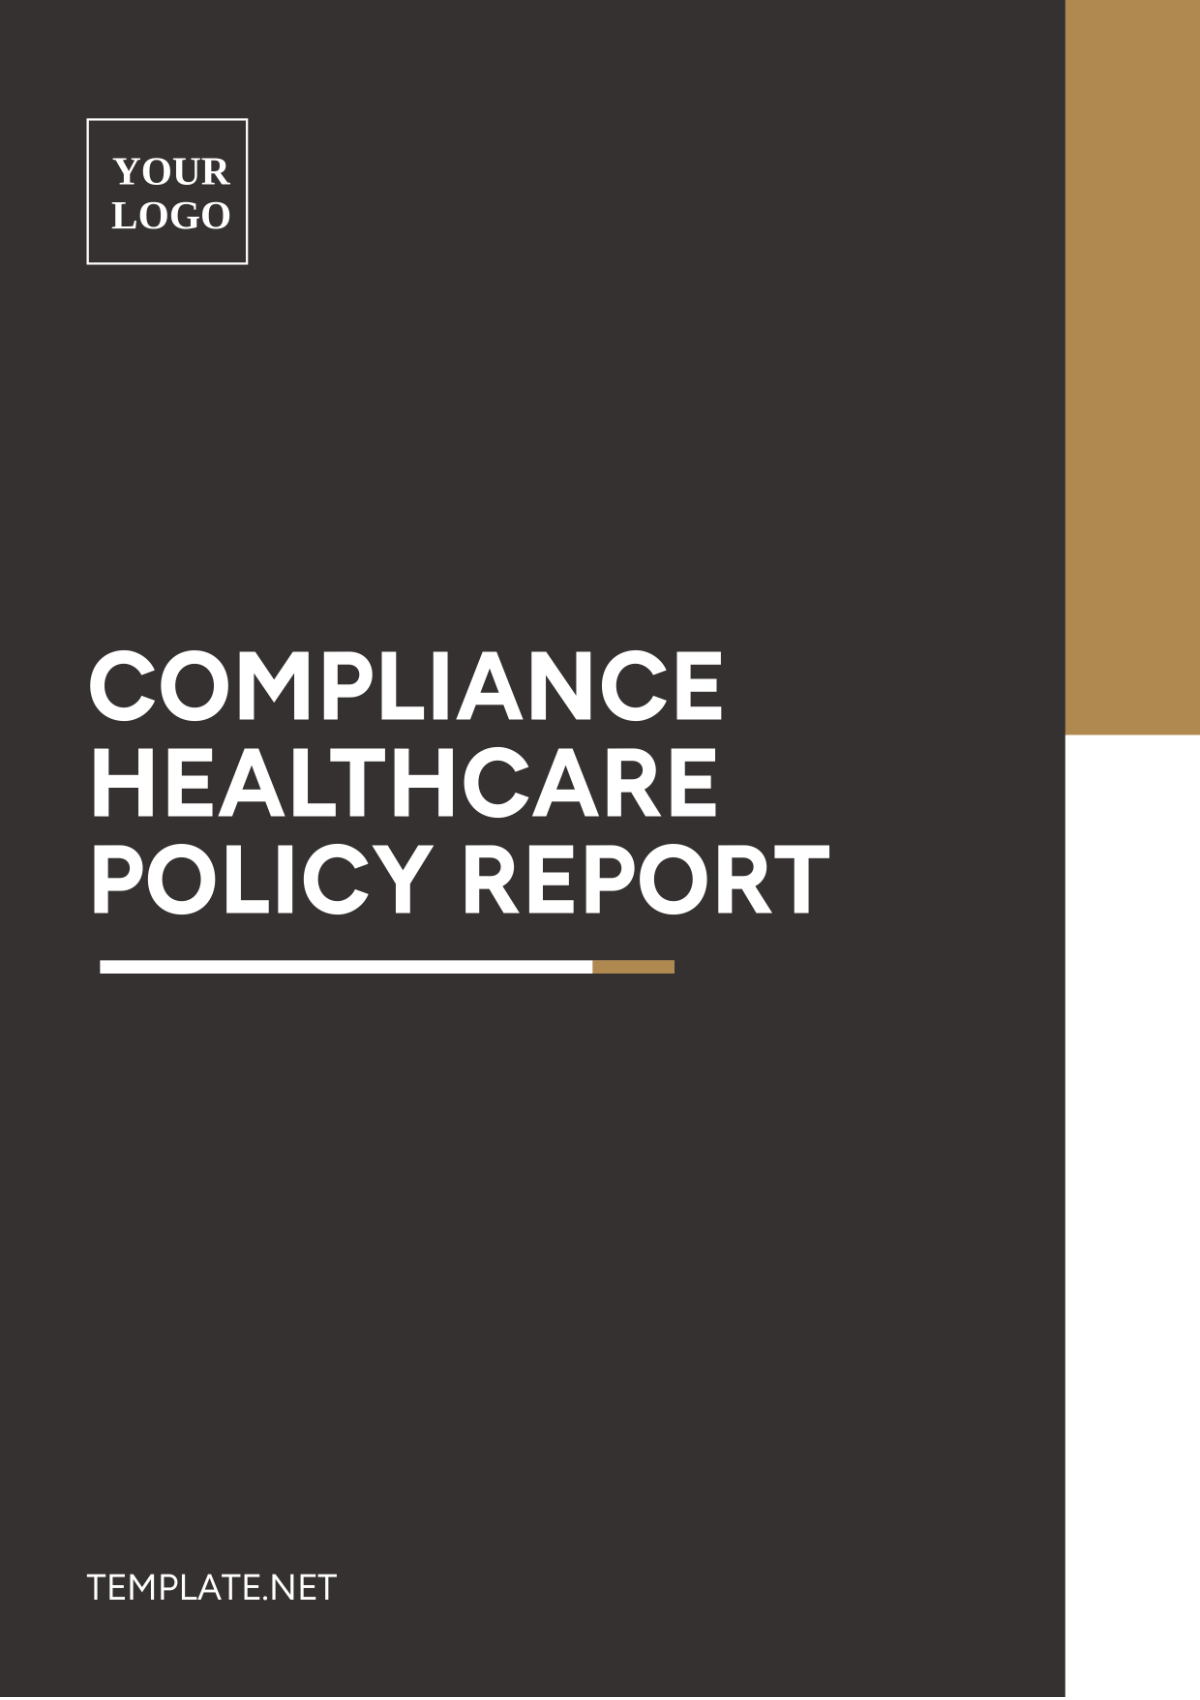 Compliance Healthcare Policy Report Template